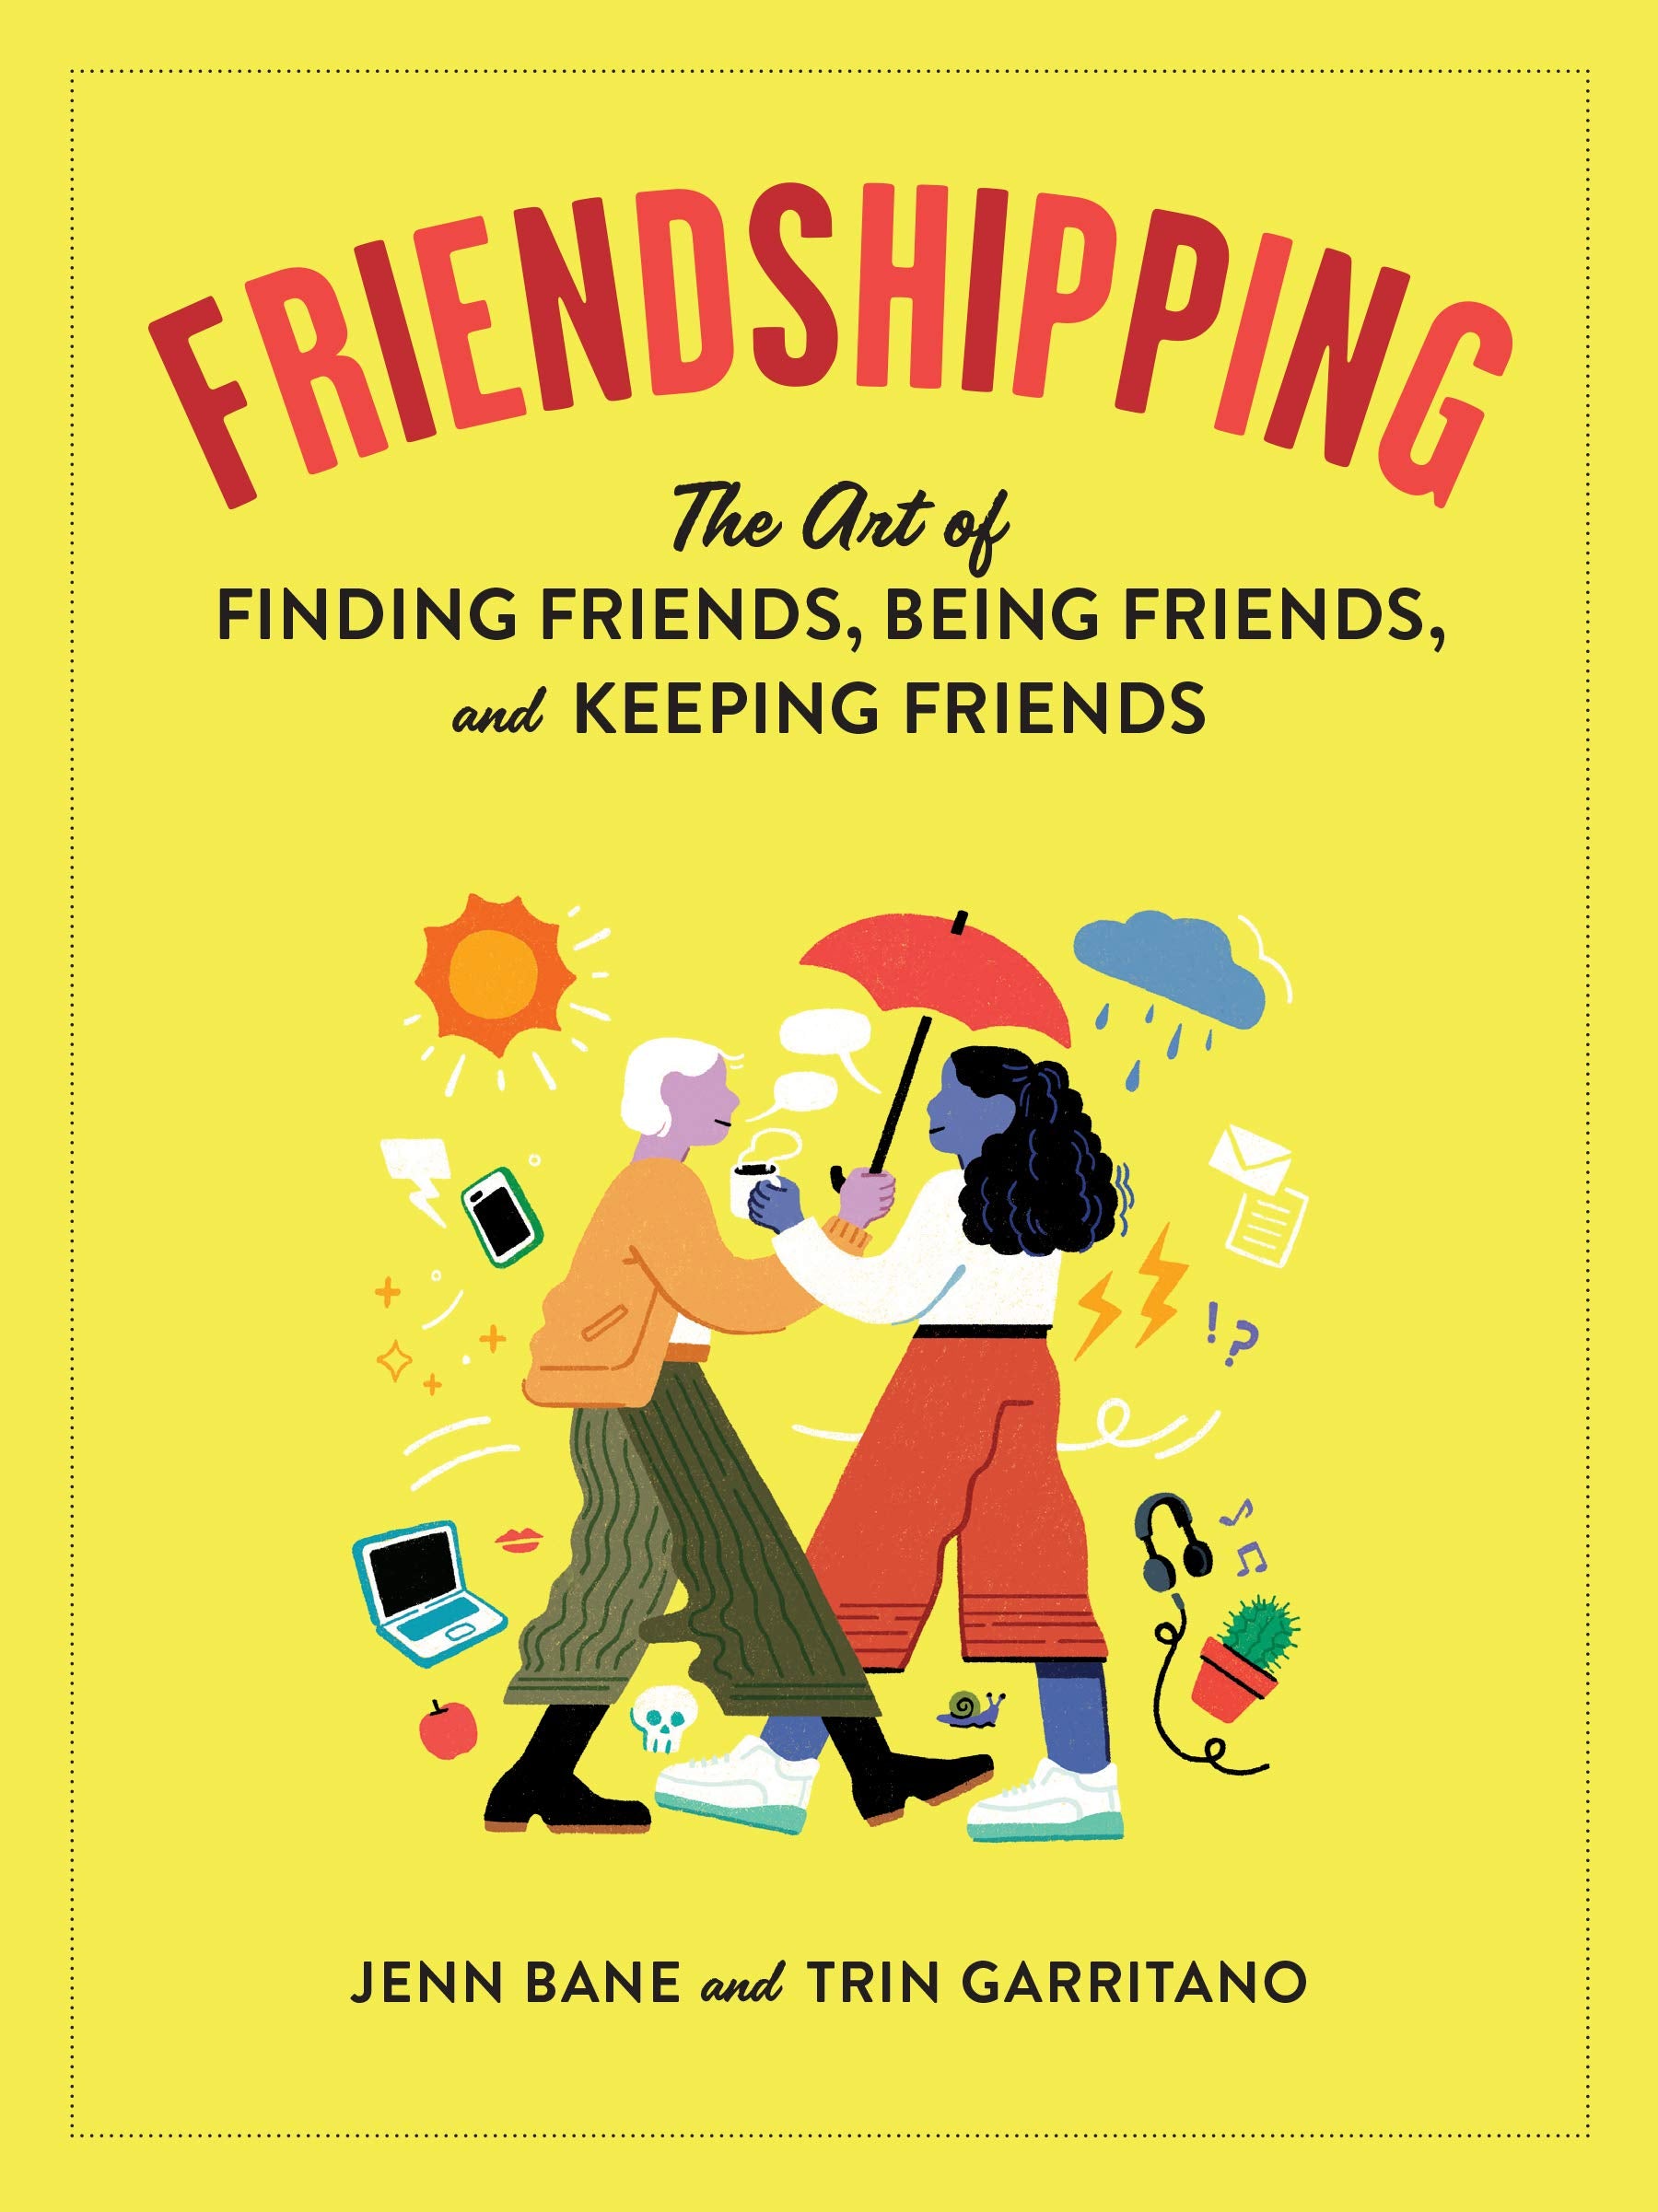 Friendshipping: The Art of Finding Friends, Being Friends, and Keeping Friends Paperback